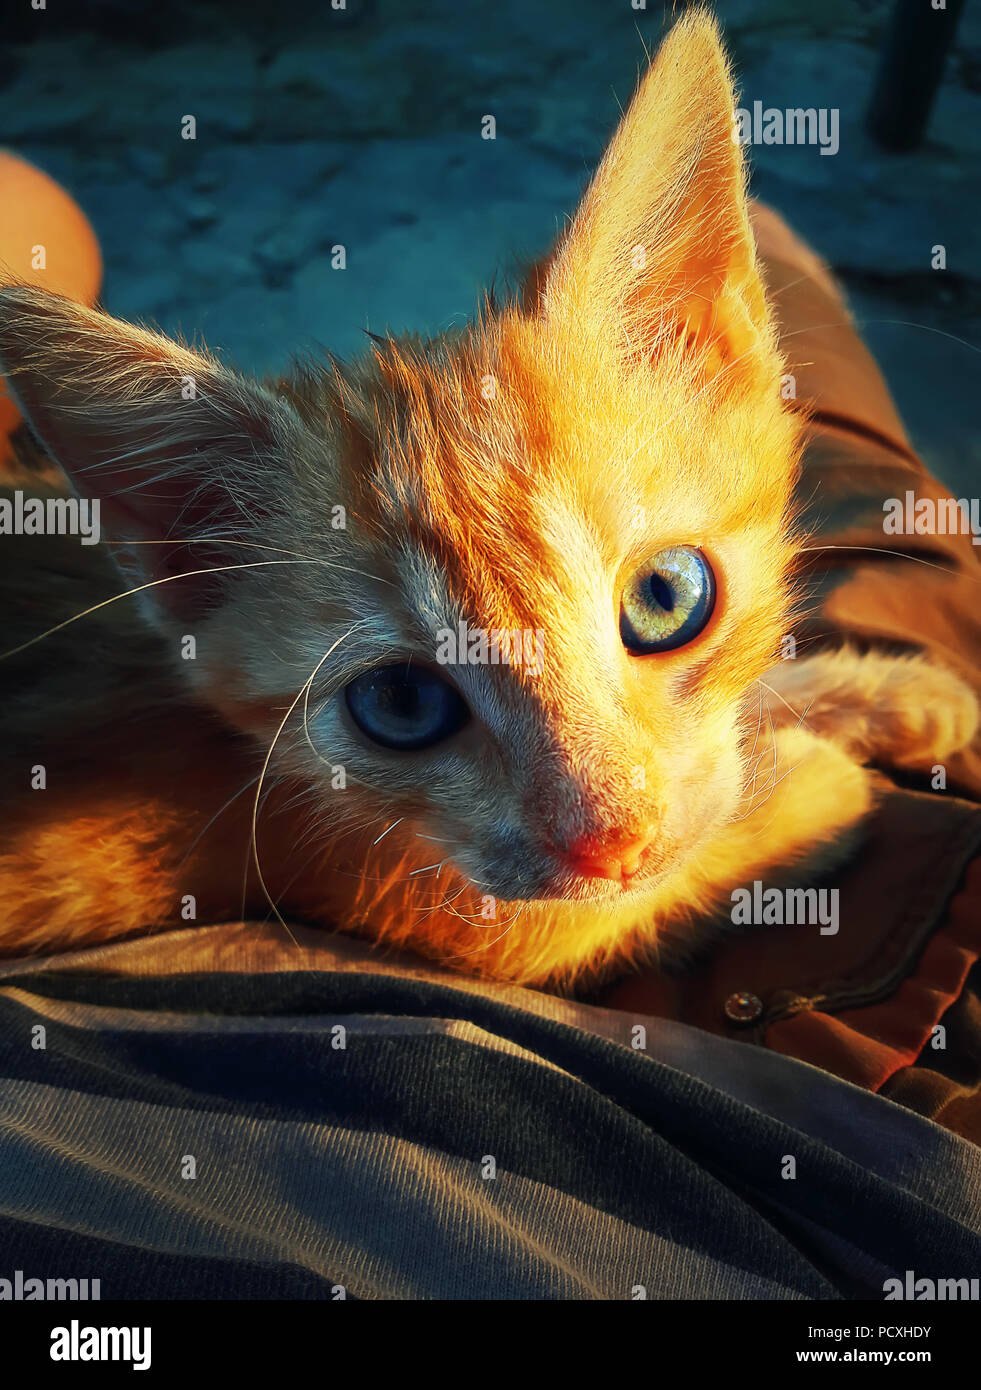 Close up view of a cute orange cat lying on its owner's knees. Beautiful kitten sight. Stock Photo